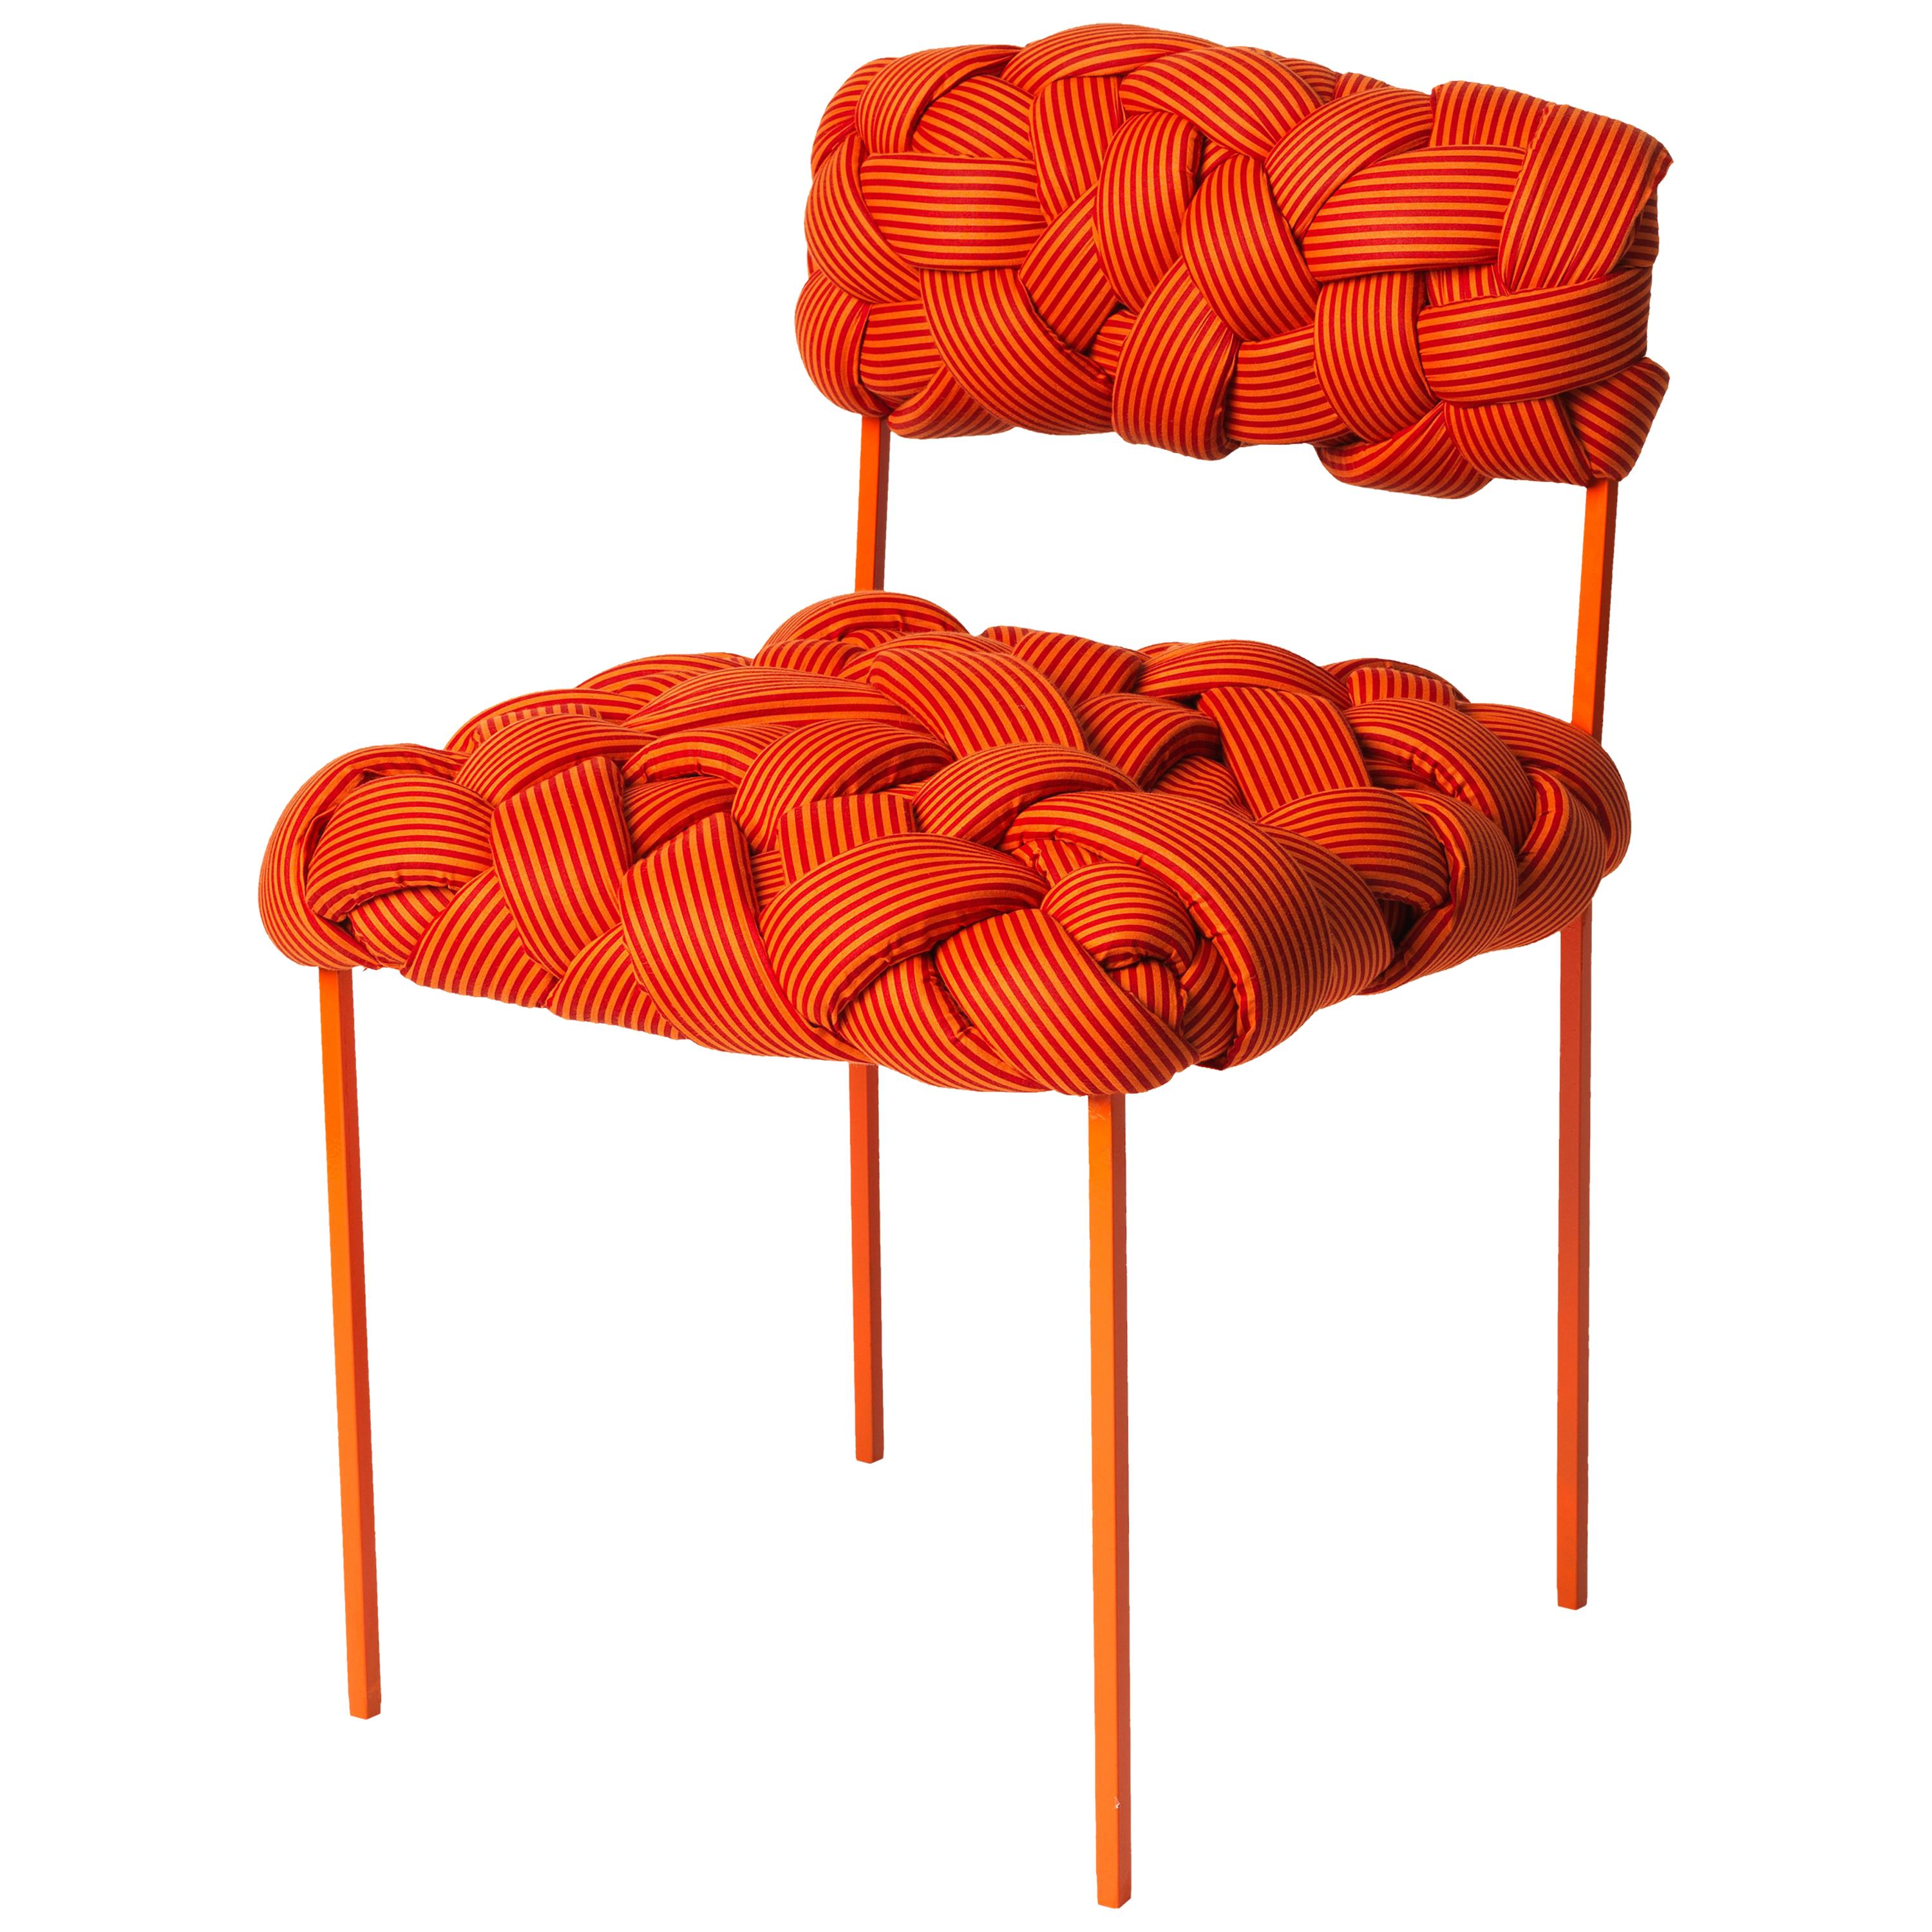 "Cloud" Contemporary Chair with Handwoven Orange Upholstery For Sale